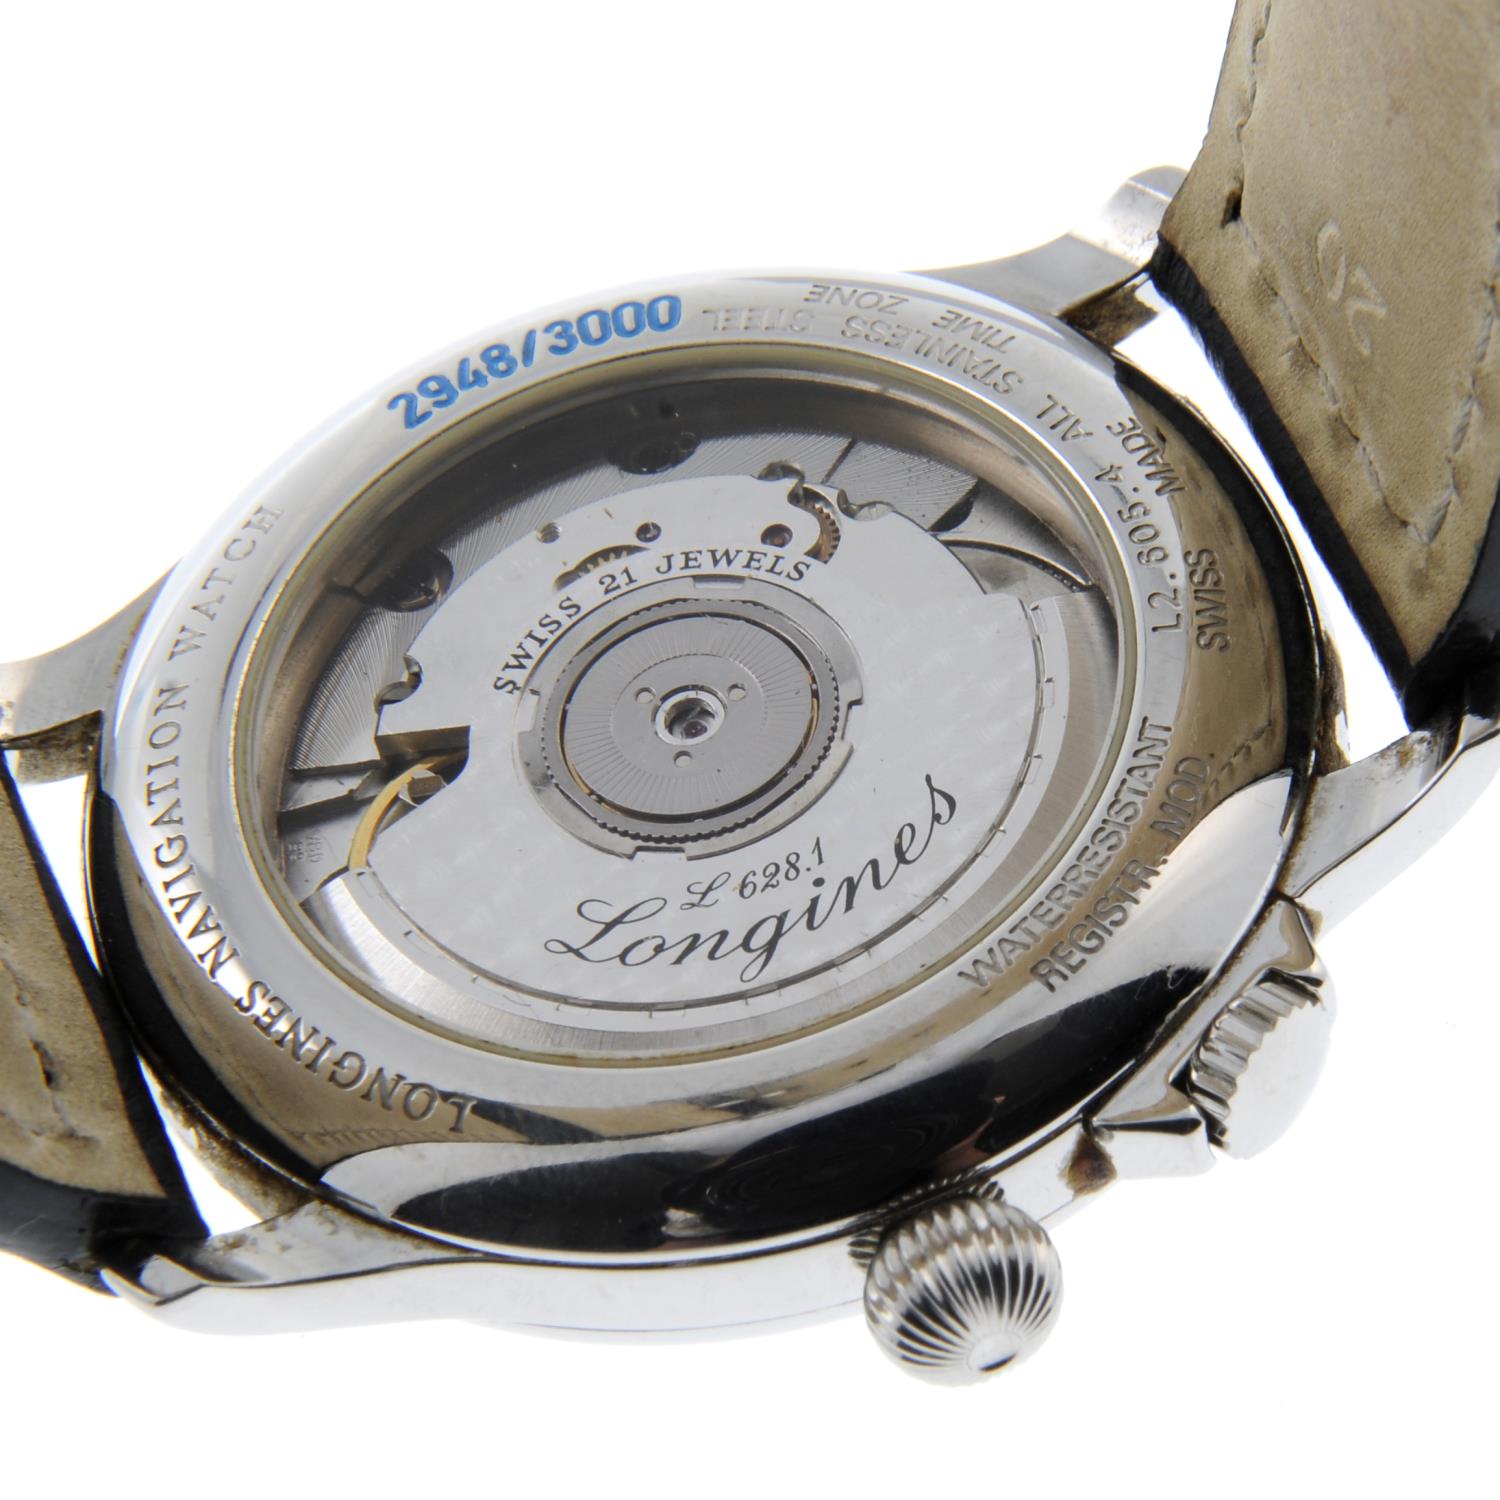 LONGINES - a limited edition gentleman's Navigation wrist watch. - Image 2 of 4